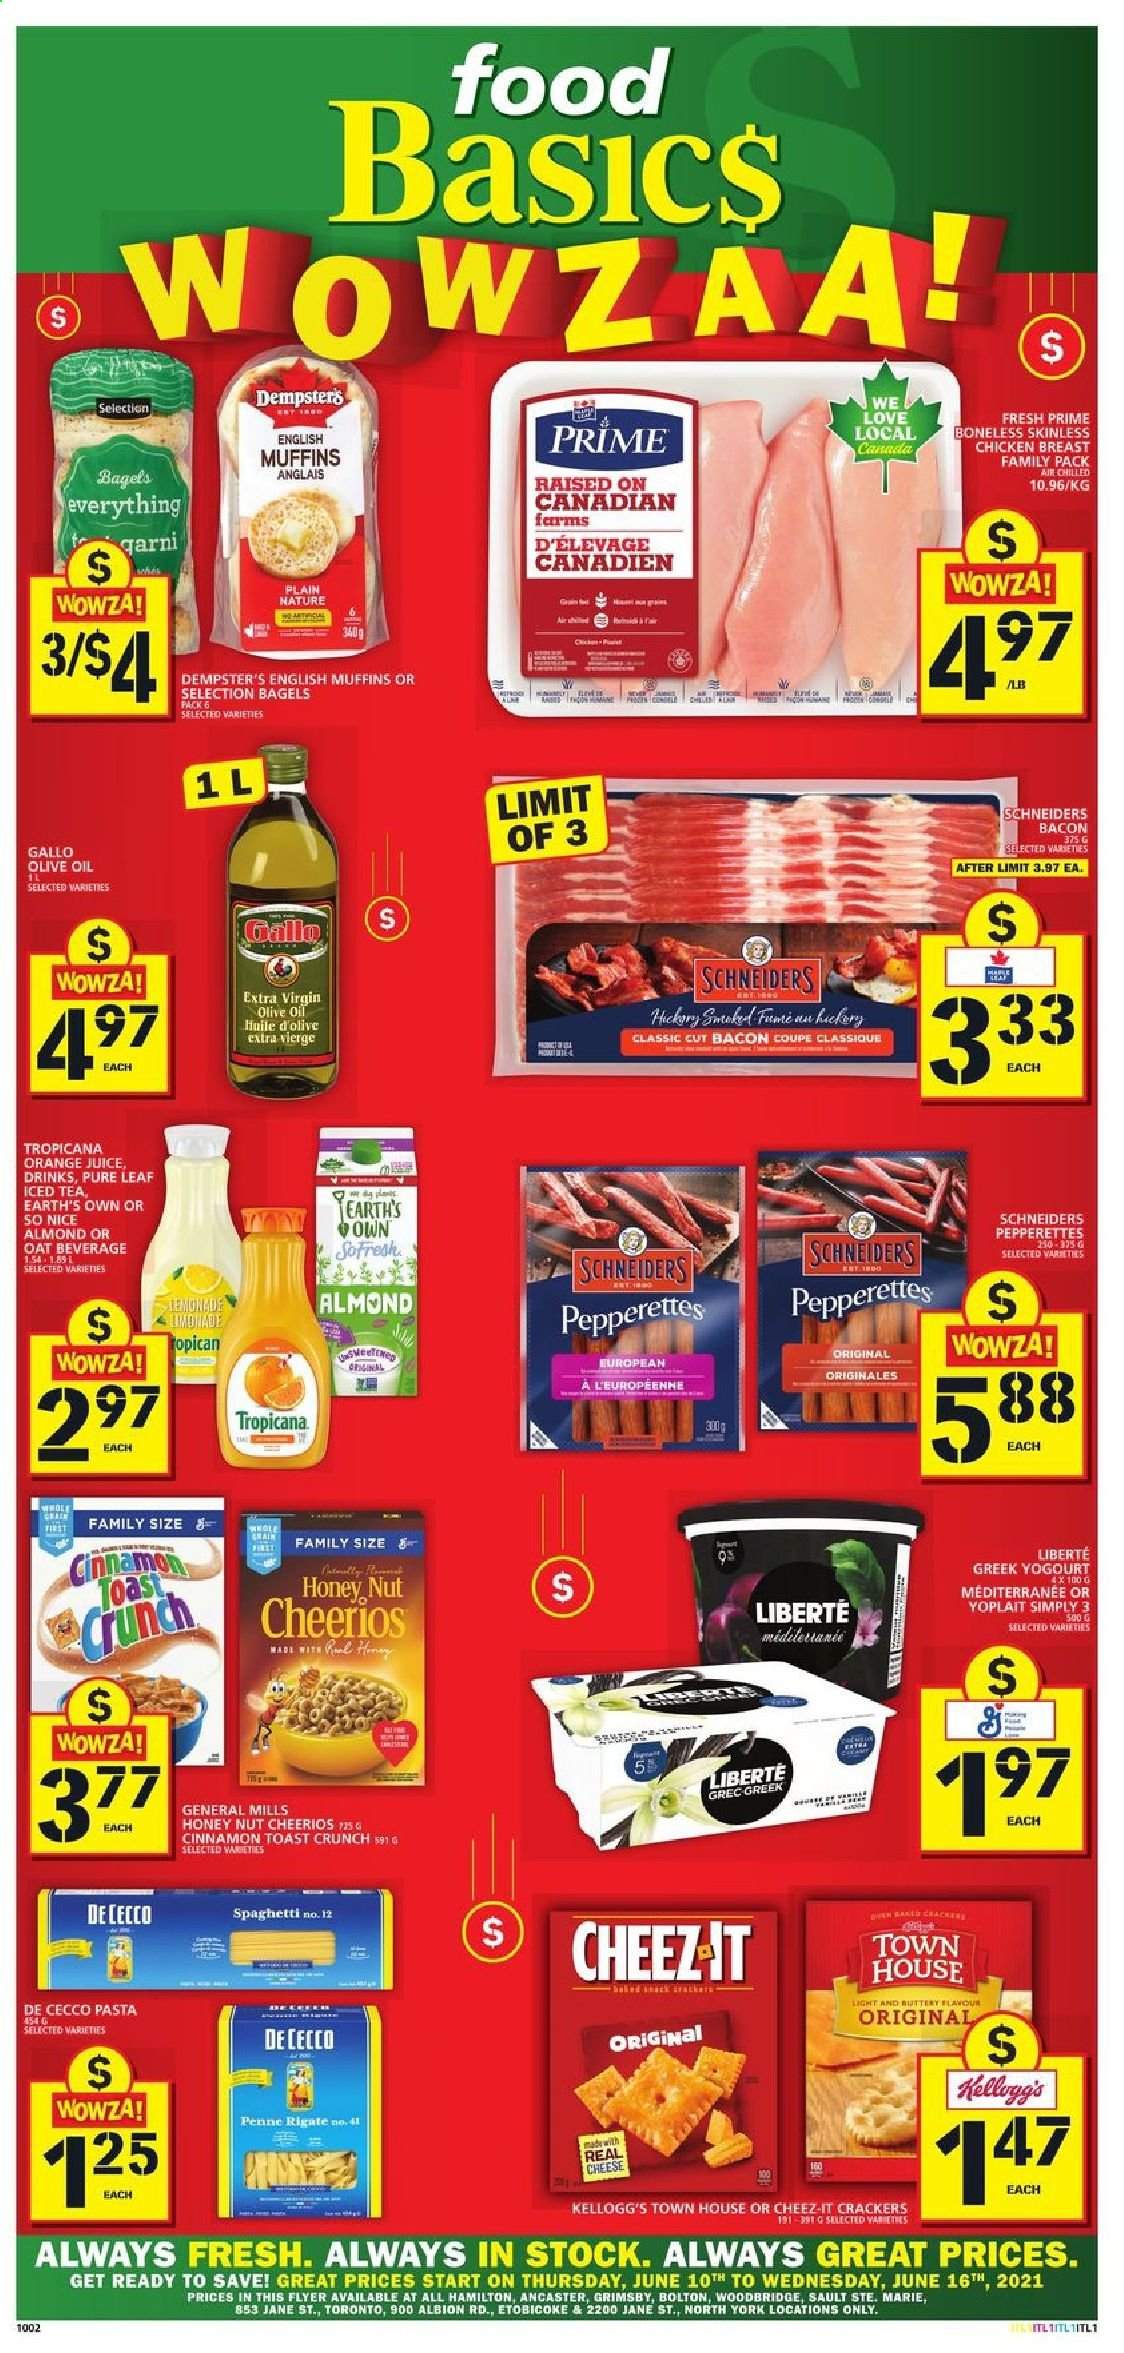 thumbnail - Food Basics Flyer - June 10, 2021 - June 16, 2021 - Sales products - bagels, english muffins, spaghetti, pasta, bacon, cheese, Yoplait, crackers, Kellogg's, Cheez-It, oats, Cheerios, penne, cinnamon, extra virgin olive oil, olive oil, oil, lemonade, orange juice, juice, ice tea, Pure Leaf, Woodbridge, So Nice, chicken breasts, chicken. Page 1.